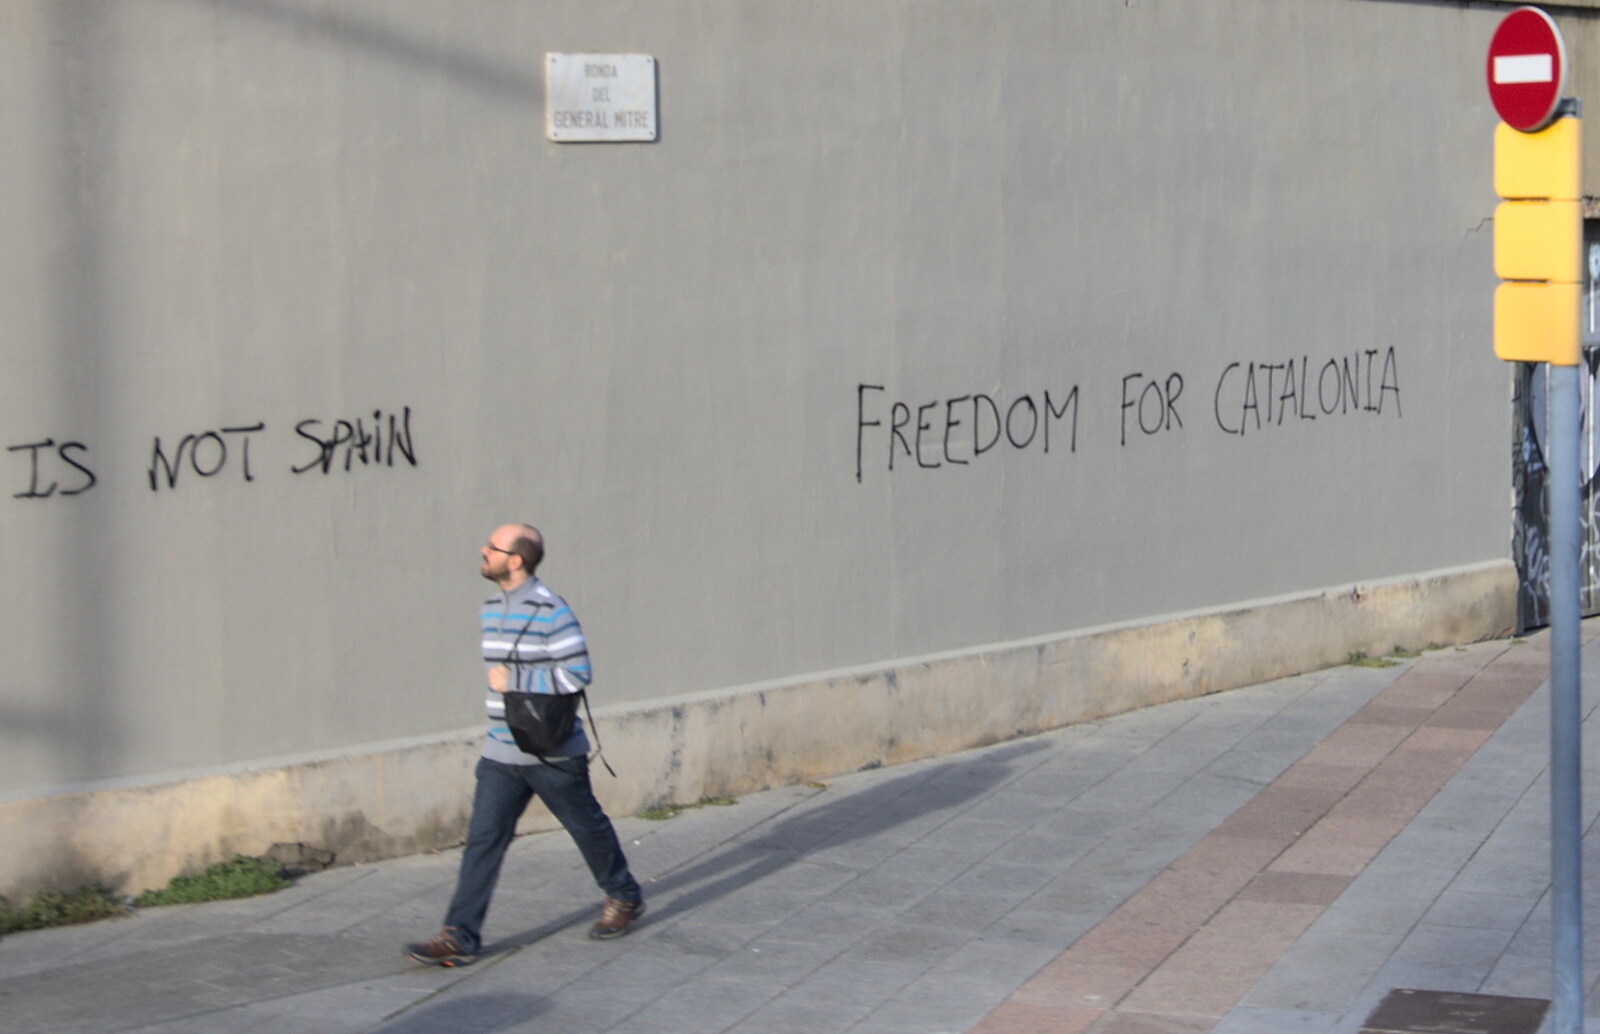 Freedom for Catalonia graffiti from A Barcelona Bus Tour, Catalonia, Spain - 25th October 2017